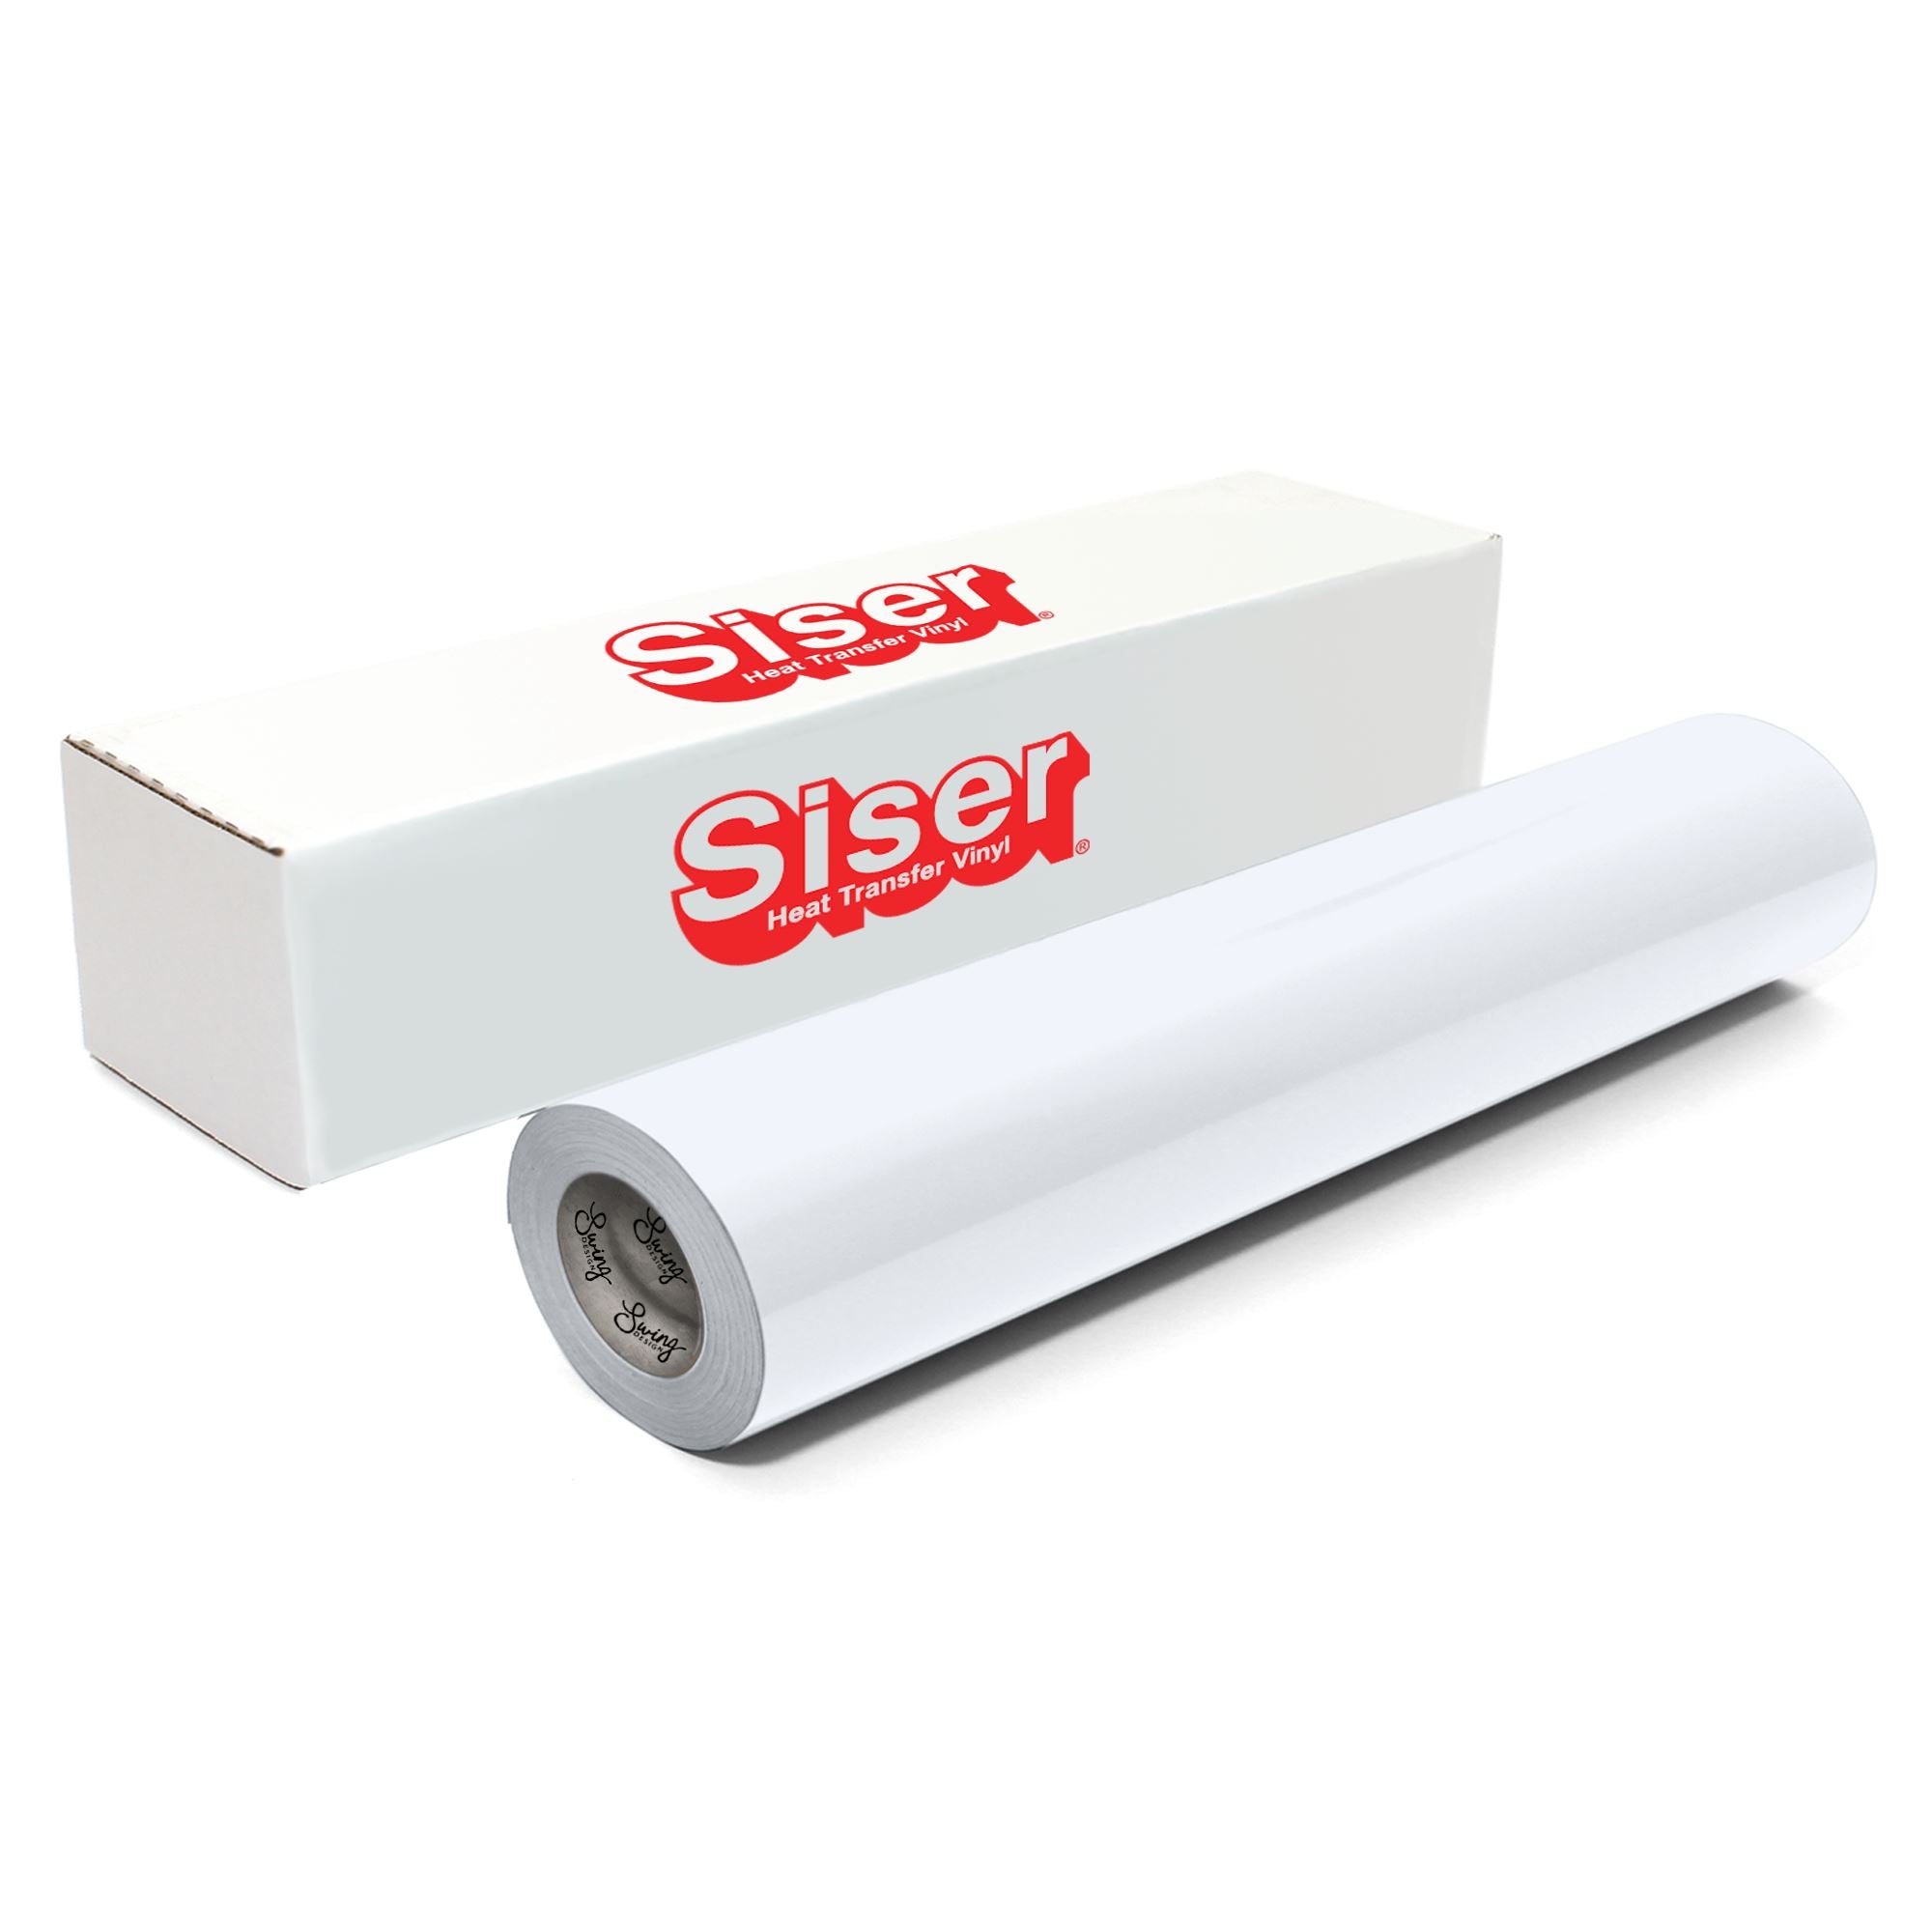 Palais Hindu Curacao - Arrival SISER H.T.V. Heat Transfer Vinyl. Rolls of 5  yards at 15 inches wide for Fl 135.00 Rolls of 10 yards at 15 inches wide  for Fl 245.00